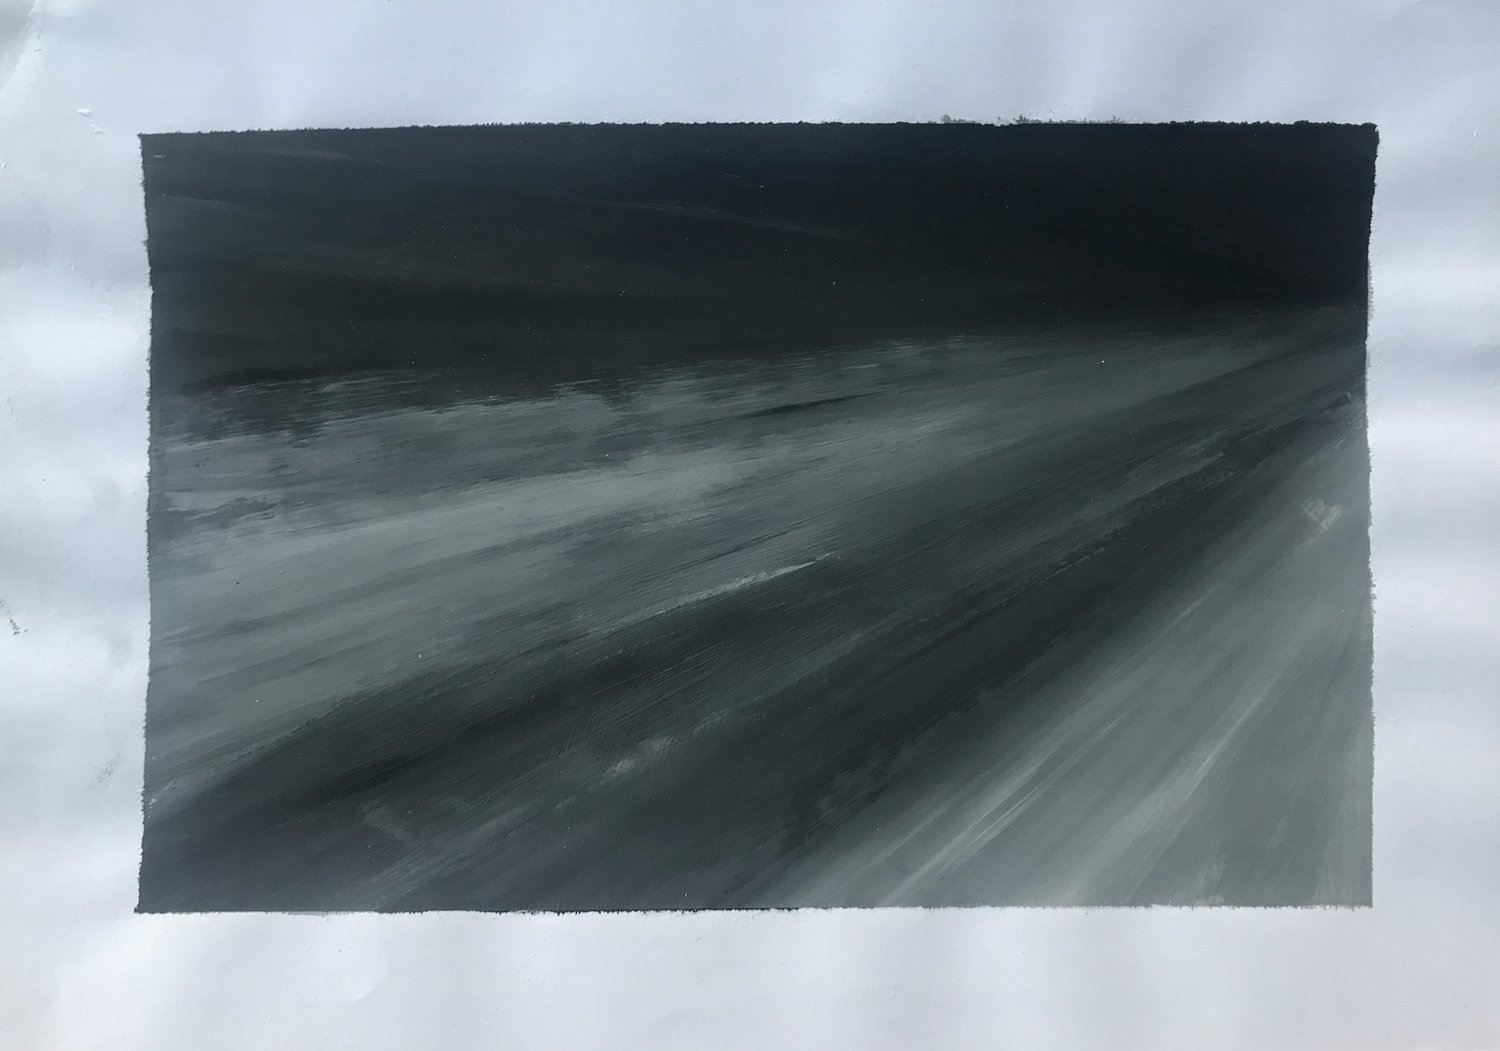 MONOCHROME study - cc 21x30 cm, acrylic on let's not talk about the quality paper